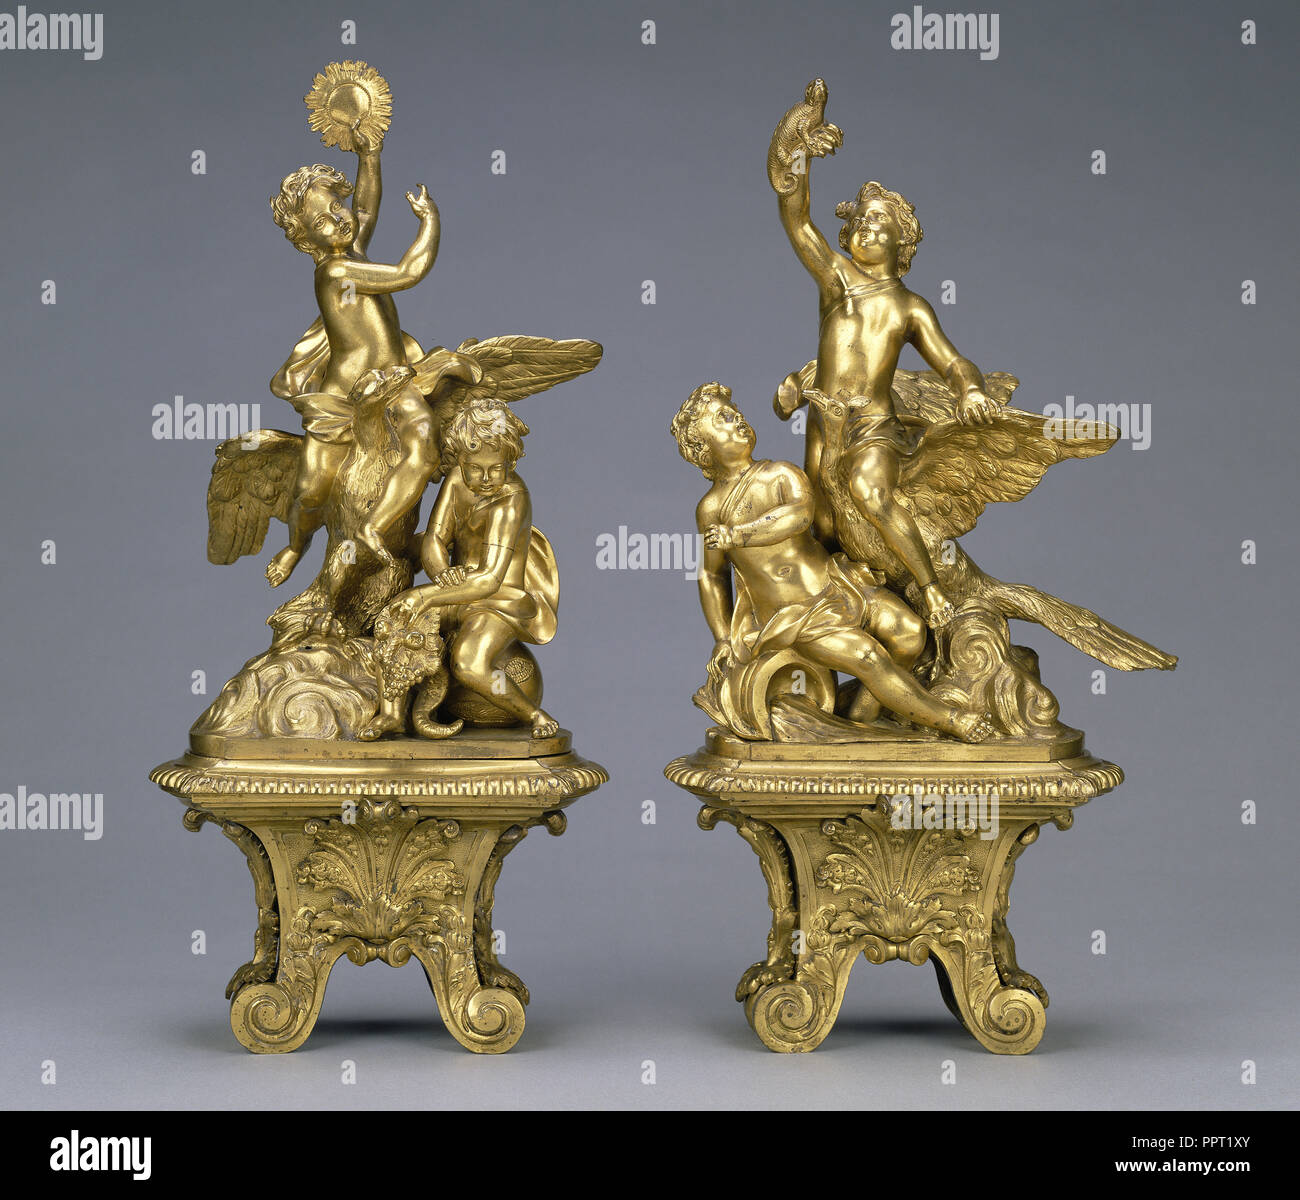 Pair of Firedogs; about 1700; Gilt bronze Stock Photo